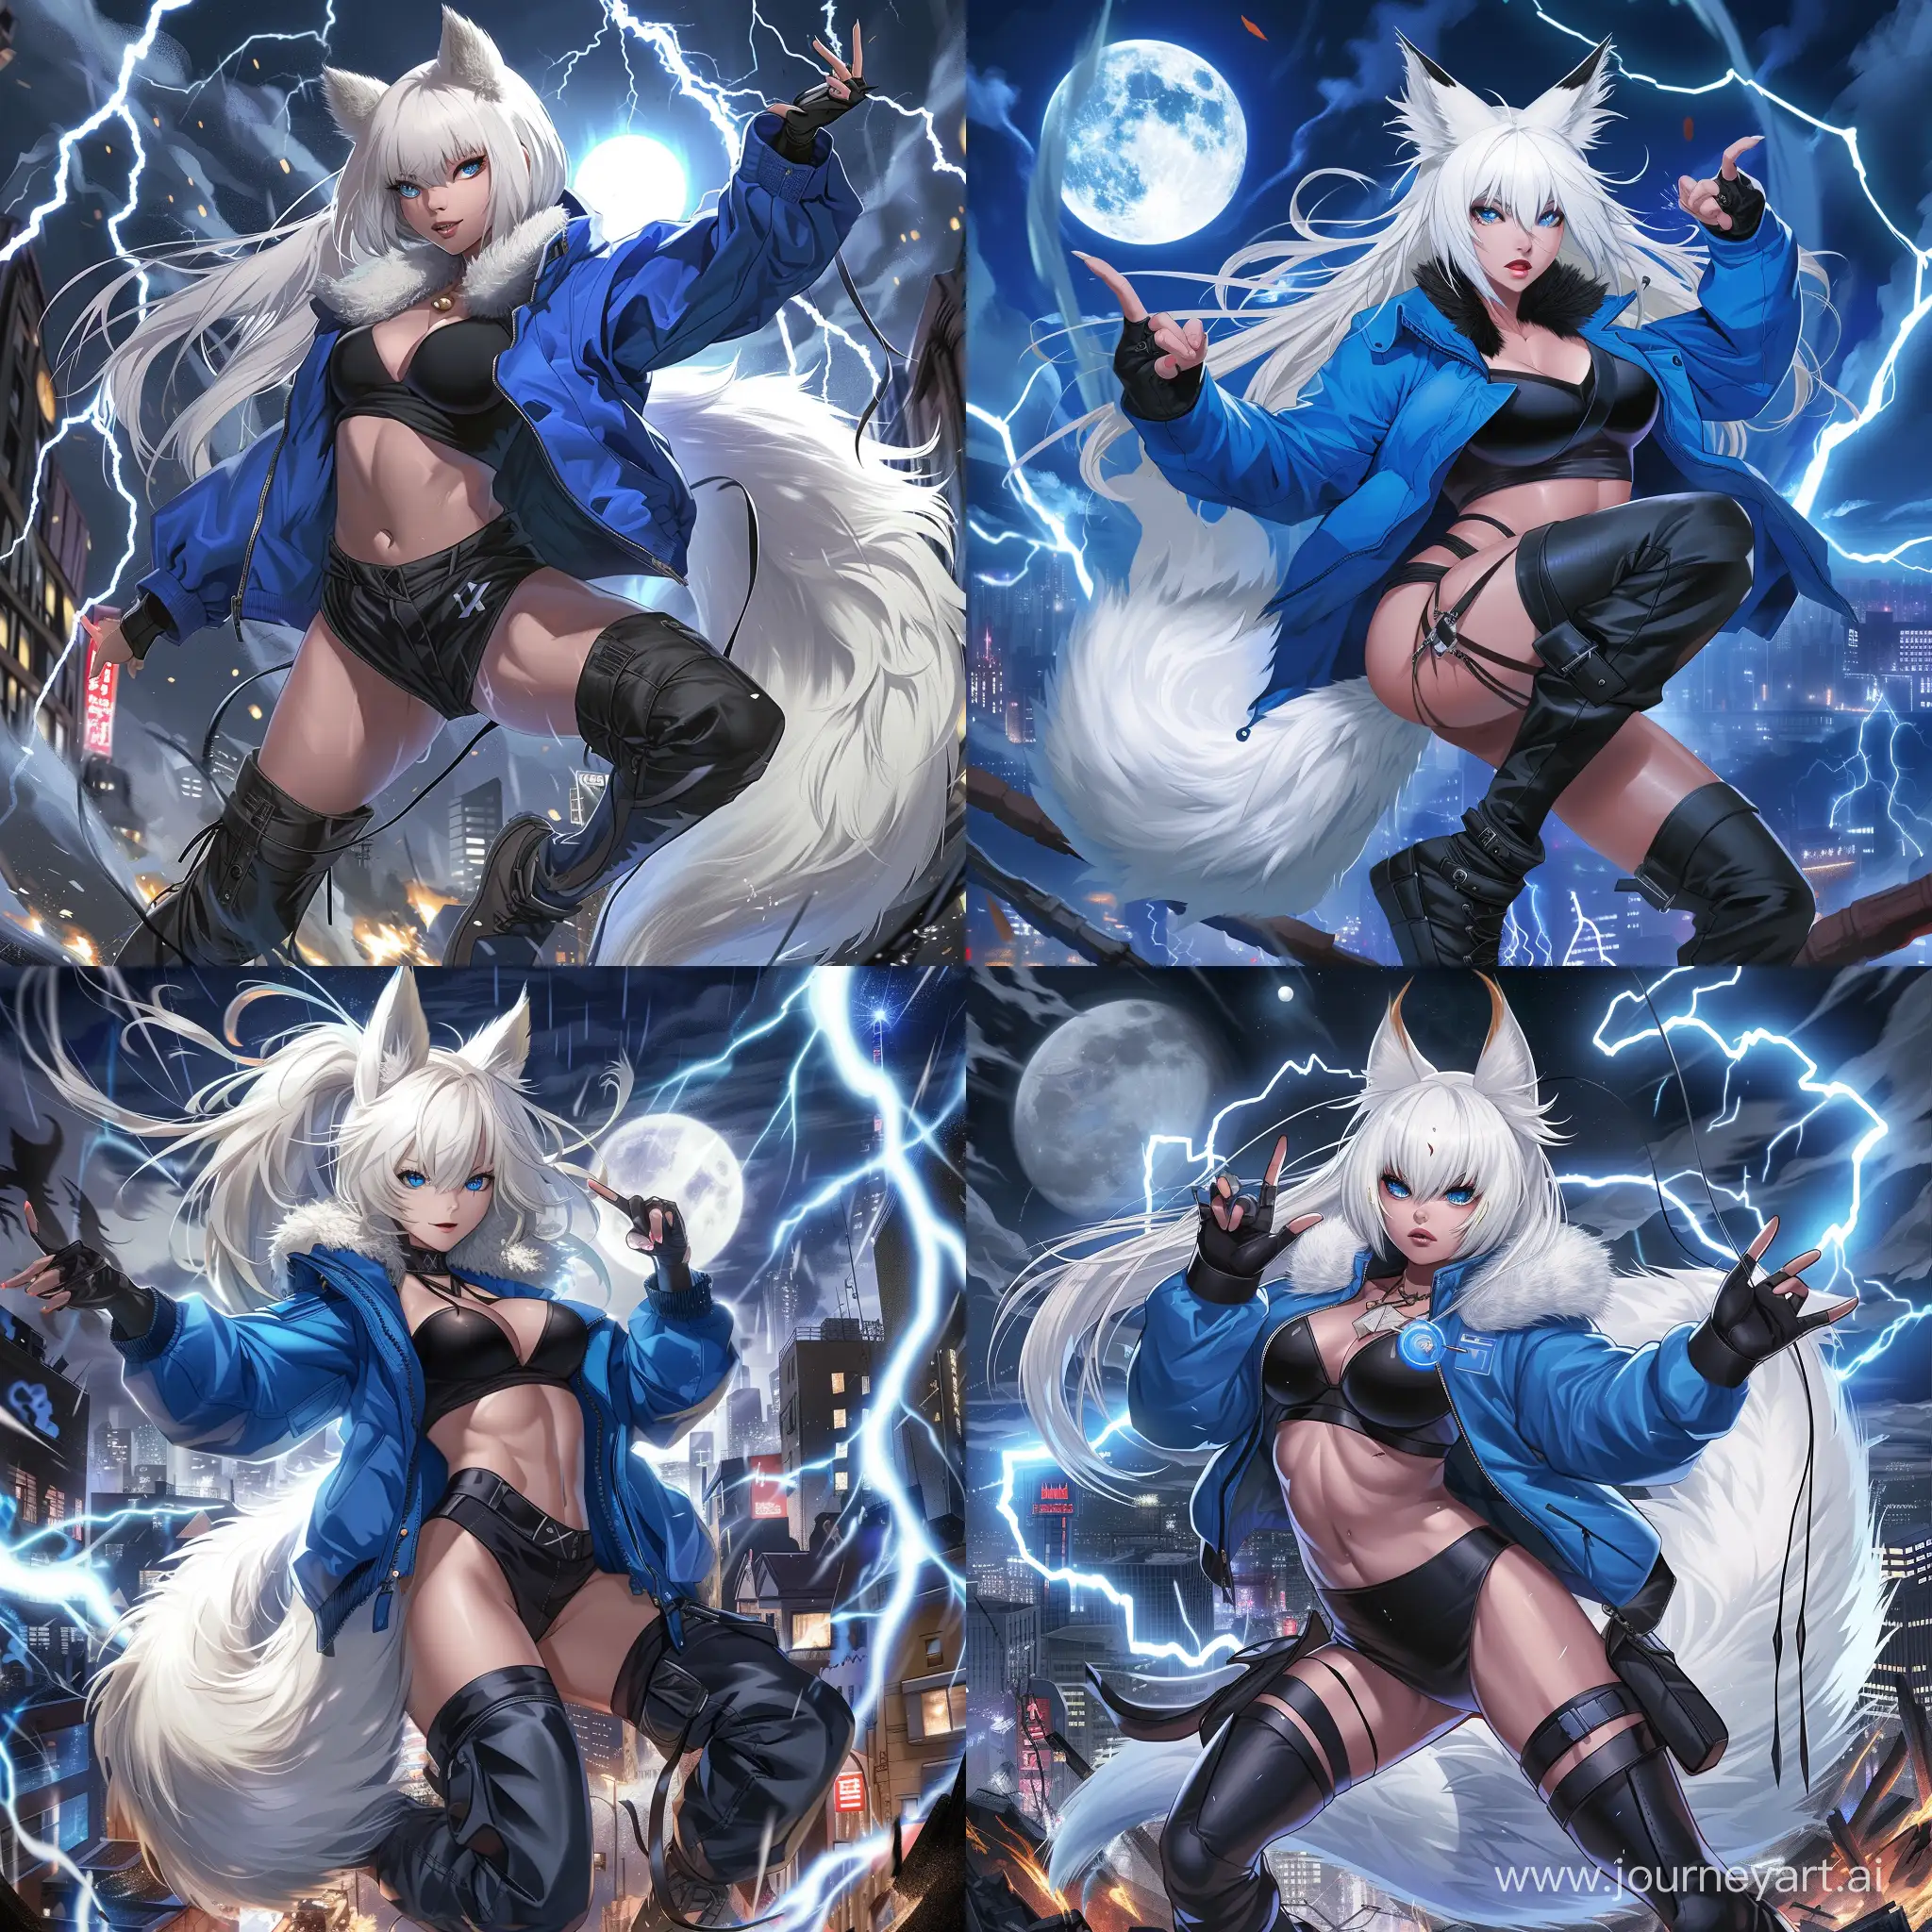 Dynamic-Asian-Woman-in-AnimeStyle-Martial-Arts-Battle-Under-the-Full-Moon